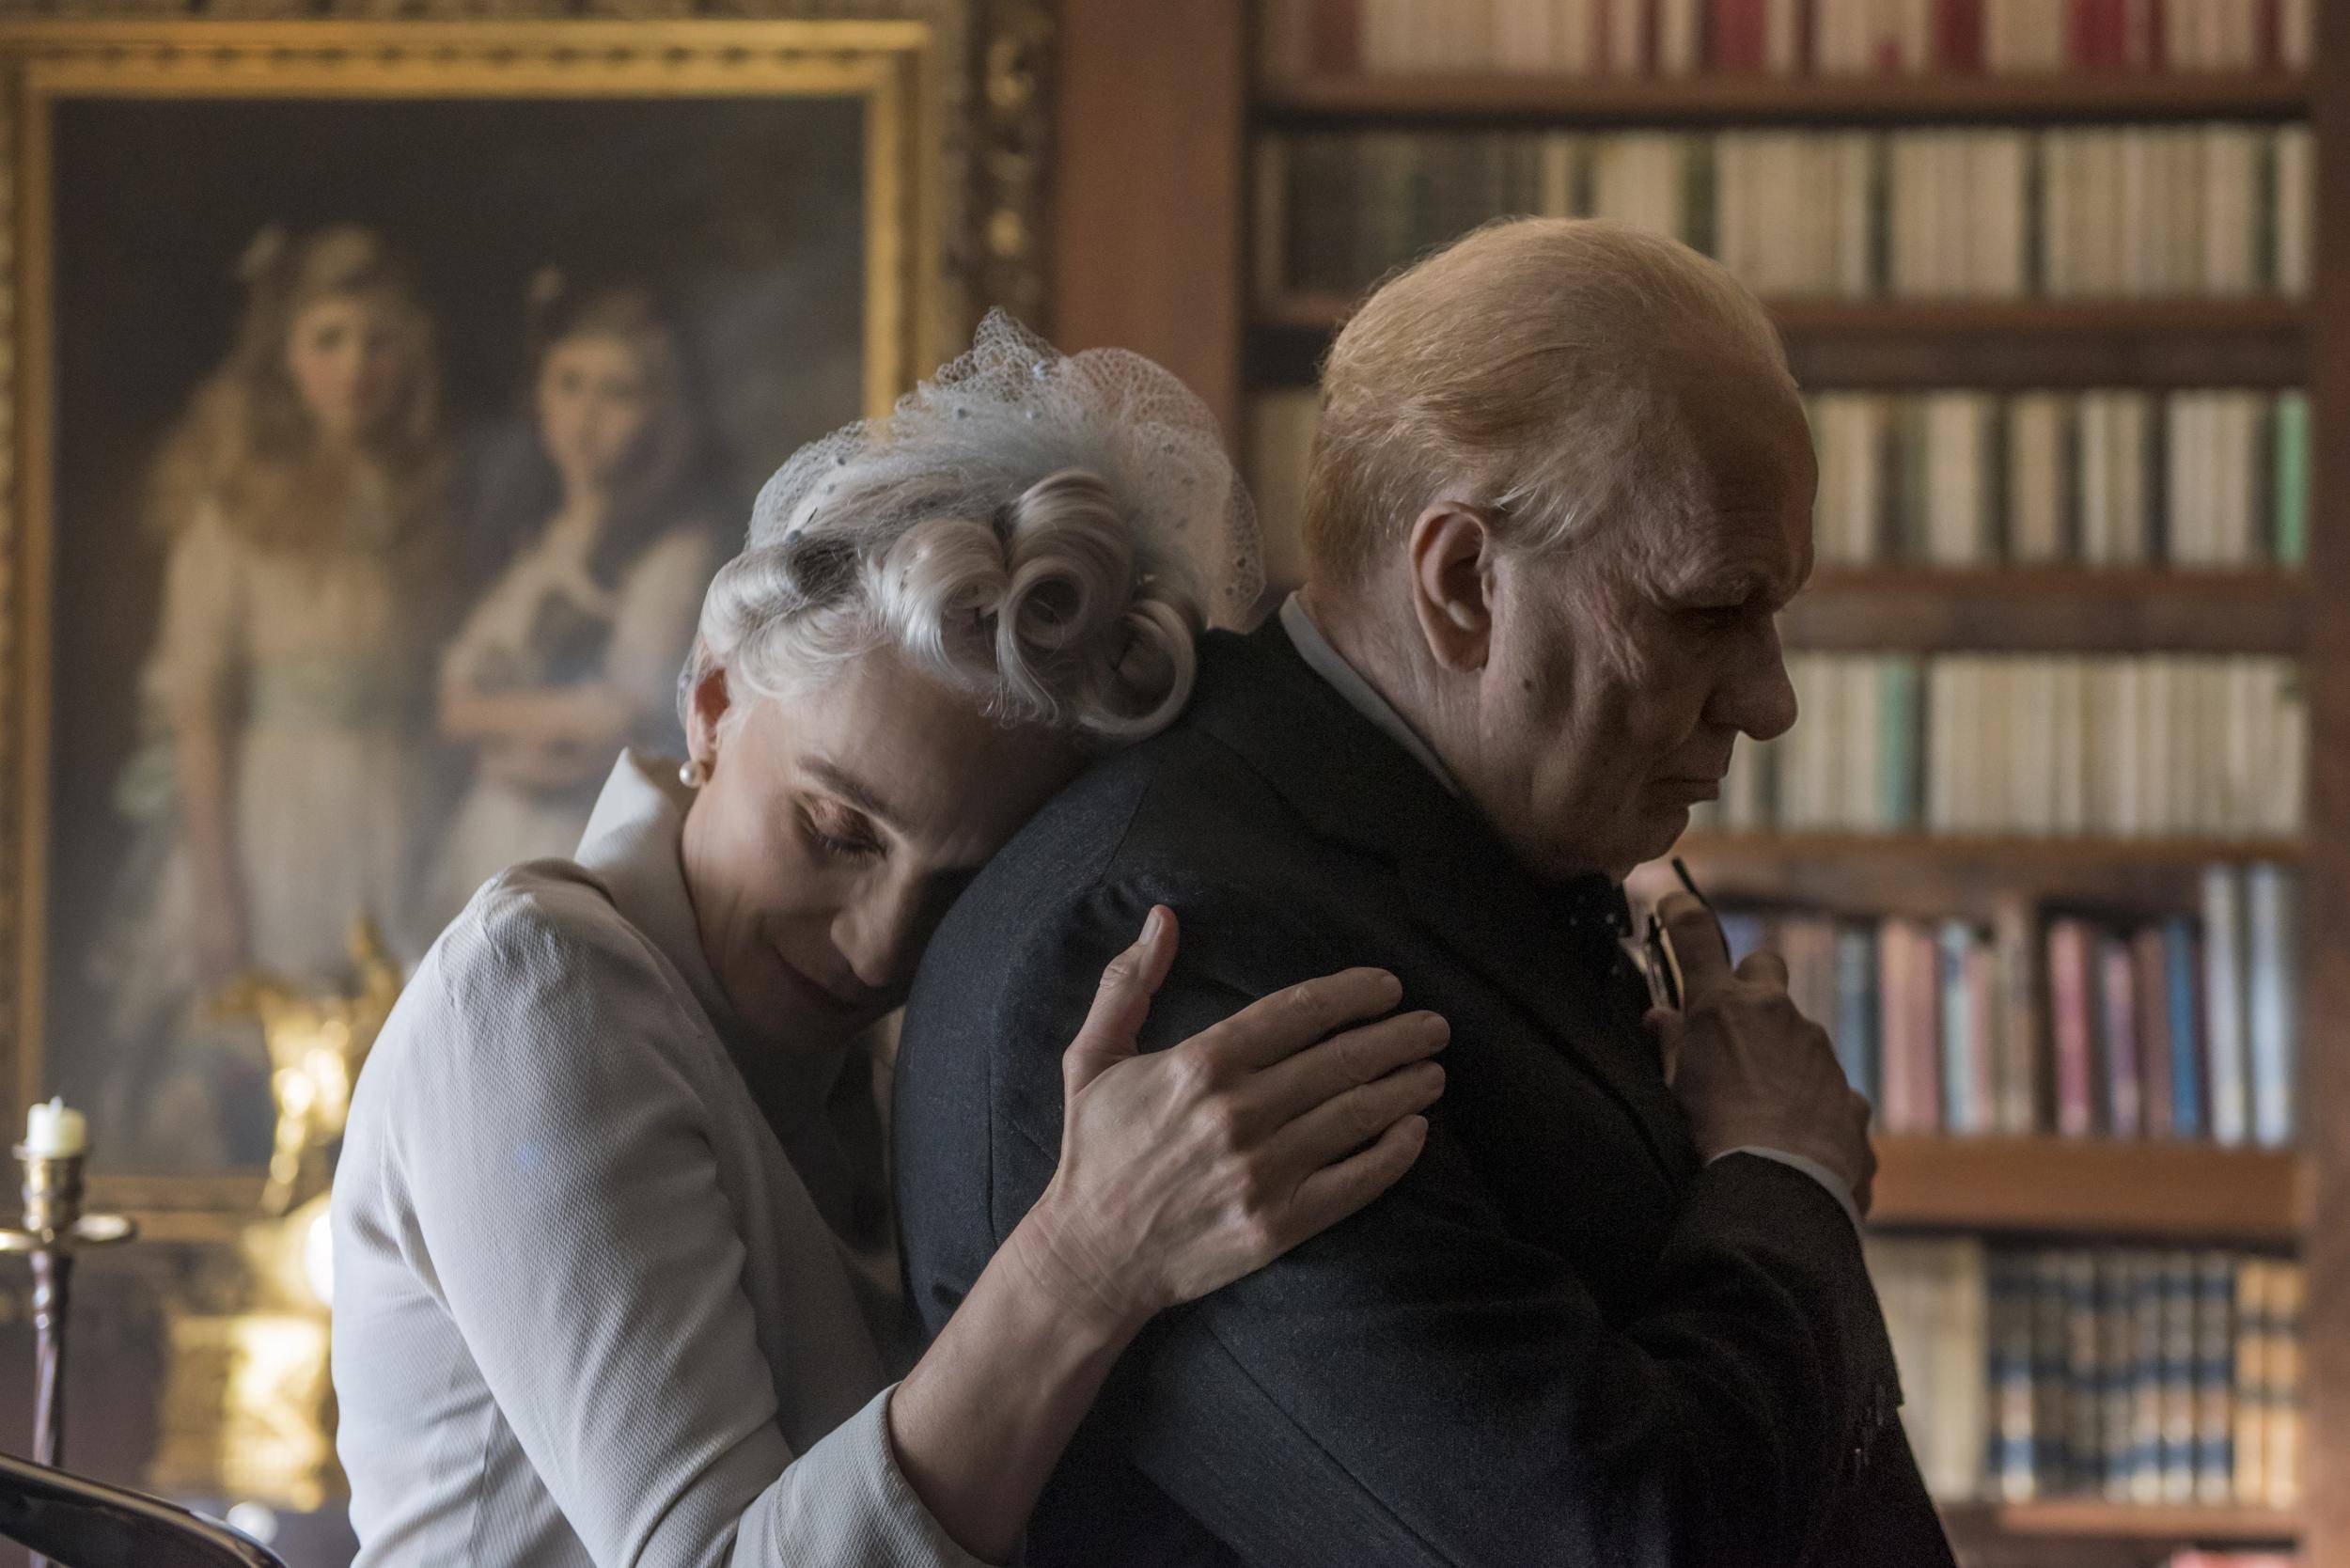 “DARKEST HOUR” inspires but exists only in the moment